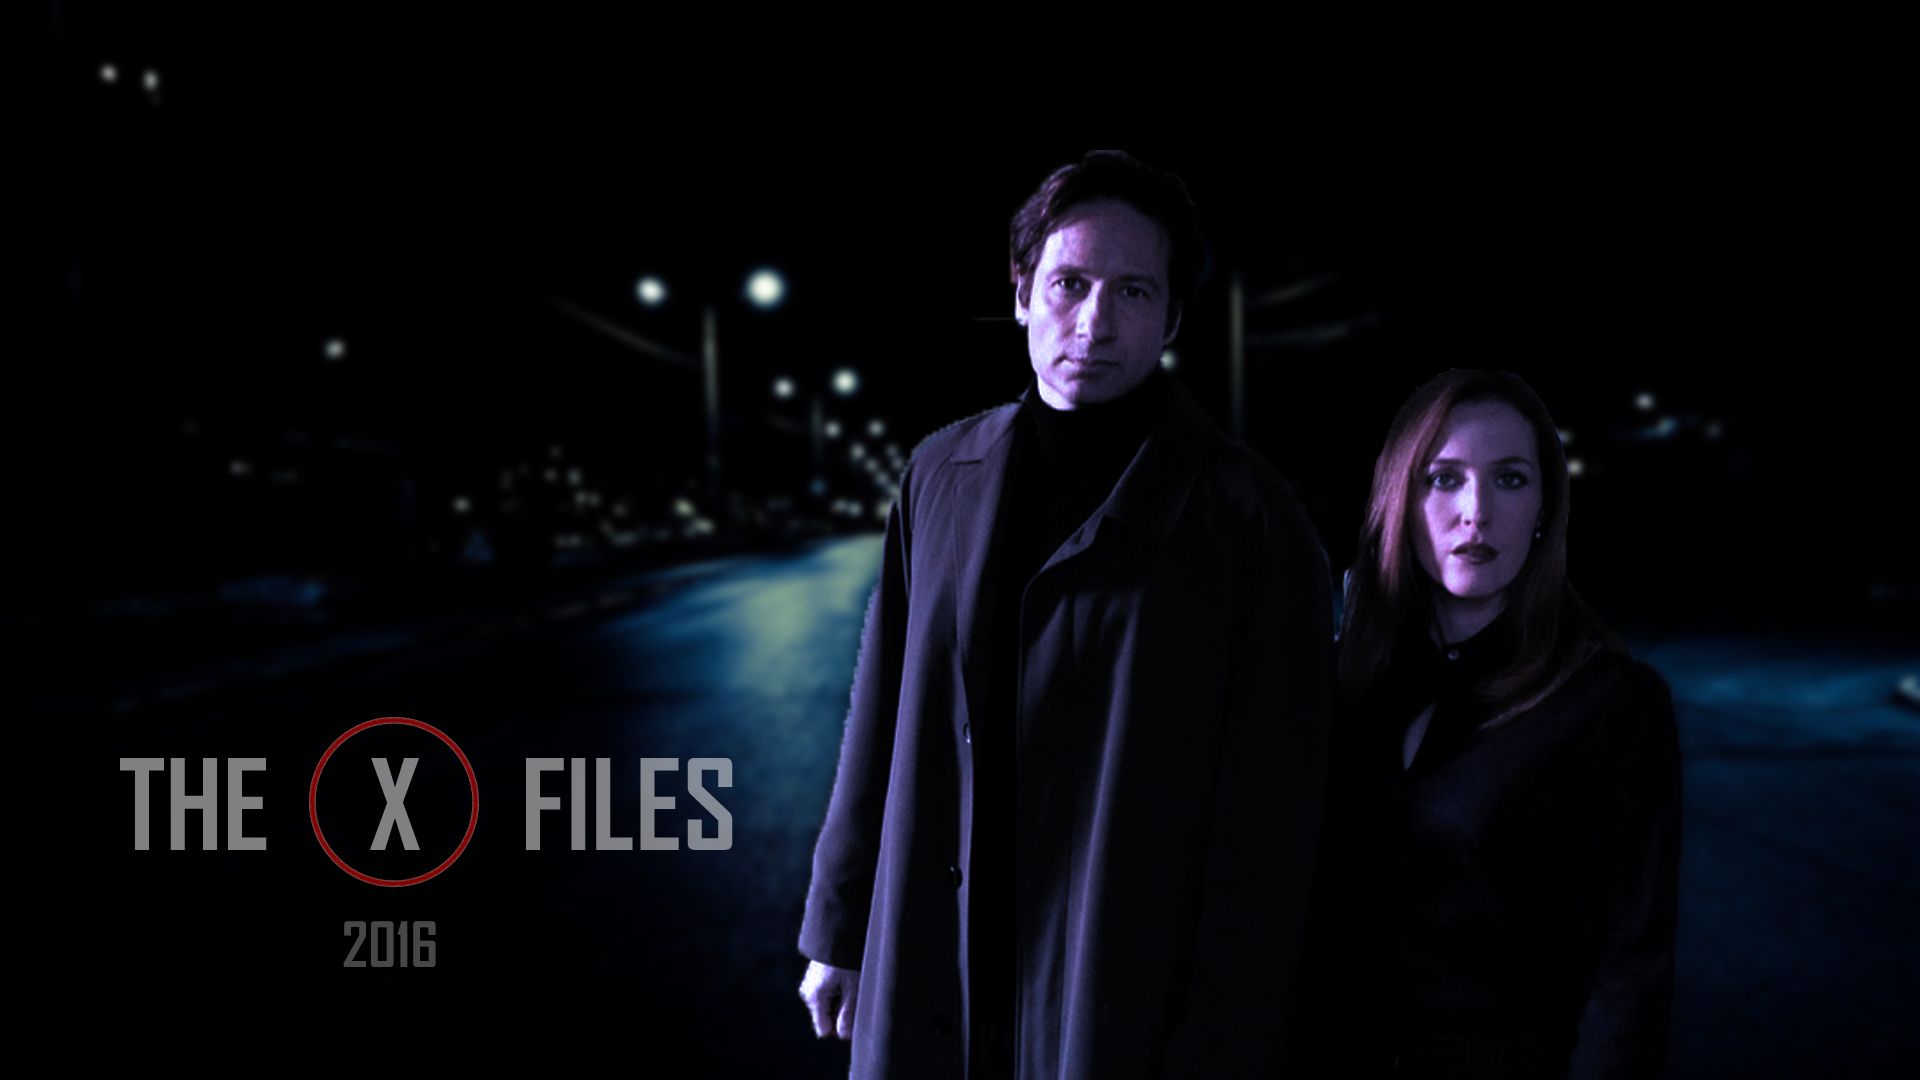 The X Files 2016 Wallpapers High Resolution and Quality Download